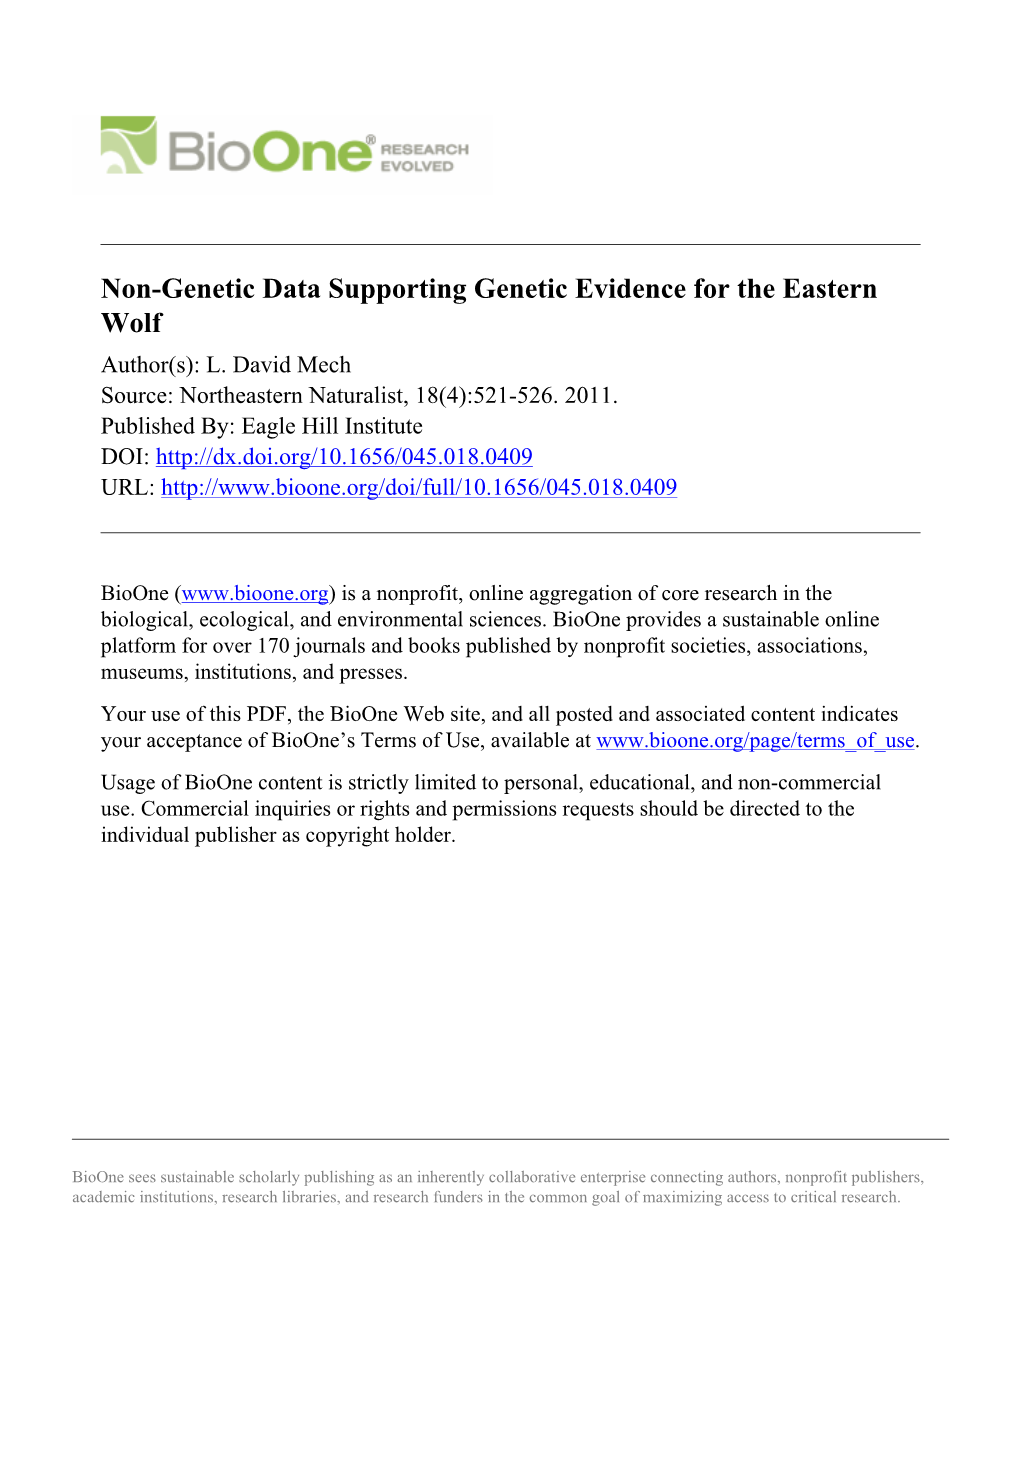 Non-Genetic Data Supporting Genetic Evidence for the Eastern Wolf Author(S): L